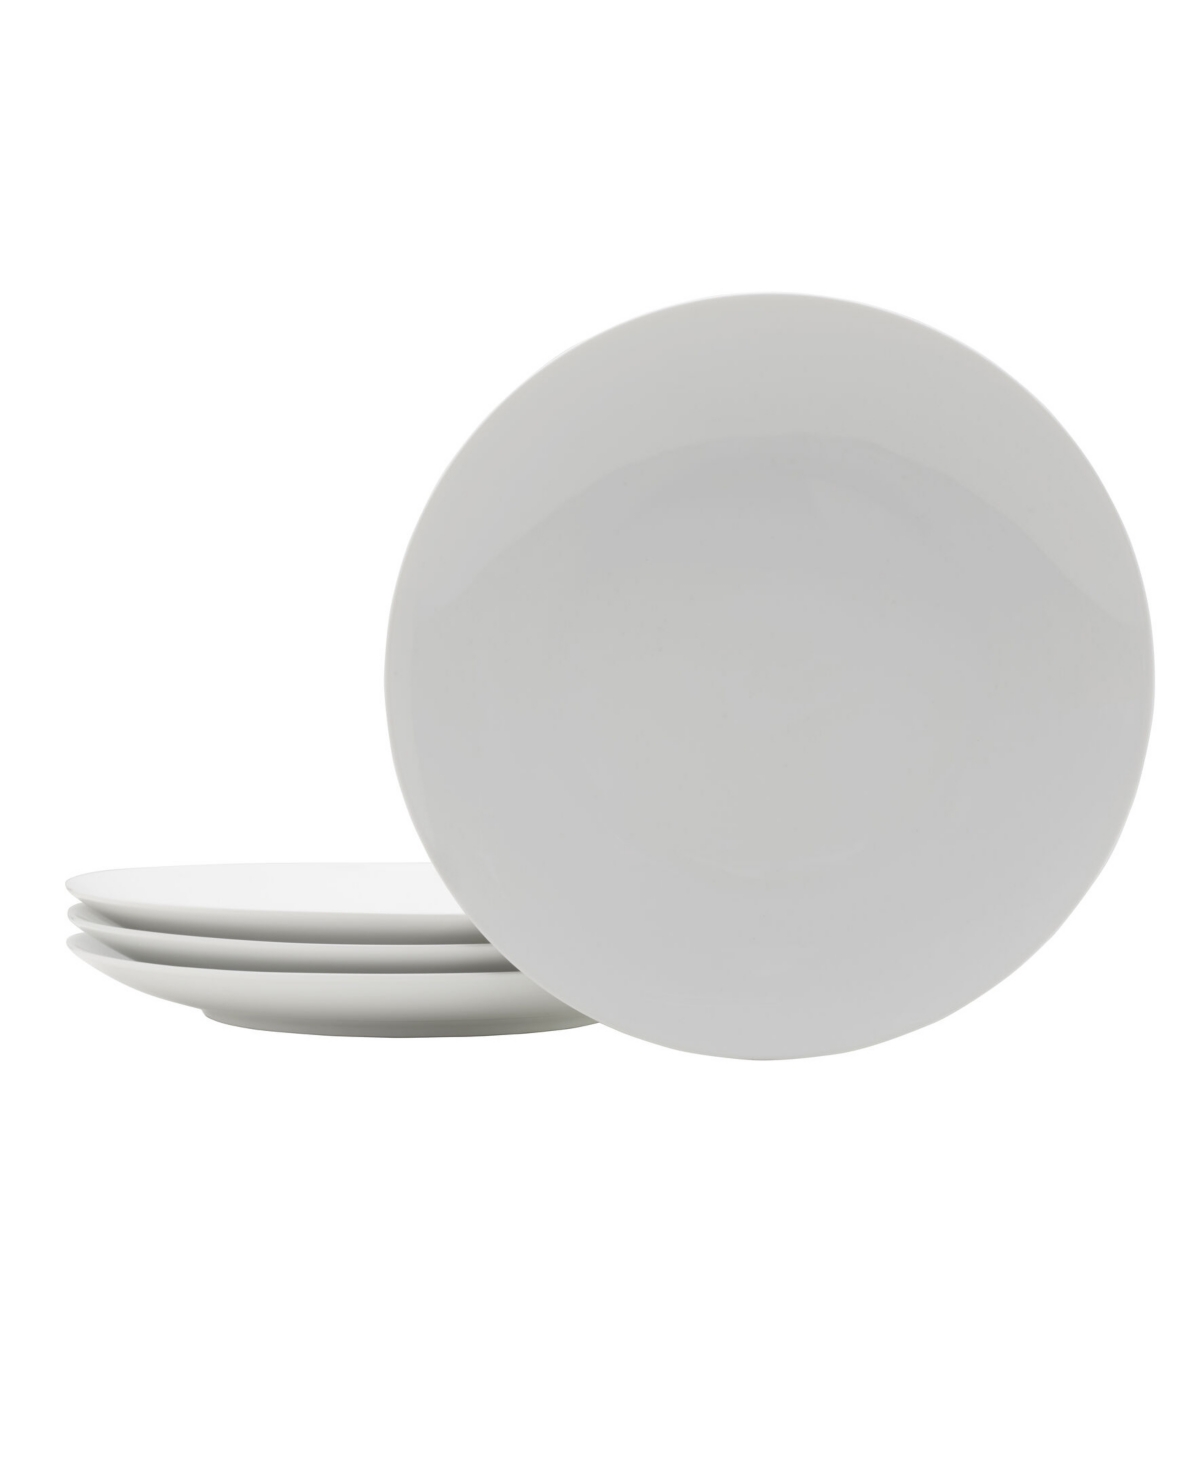 Everyday Whiteware Coupe Dinner Plate 4 Piece Set - White